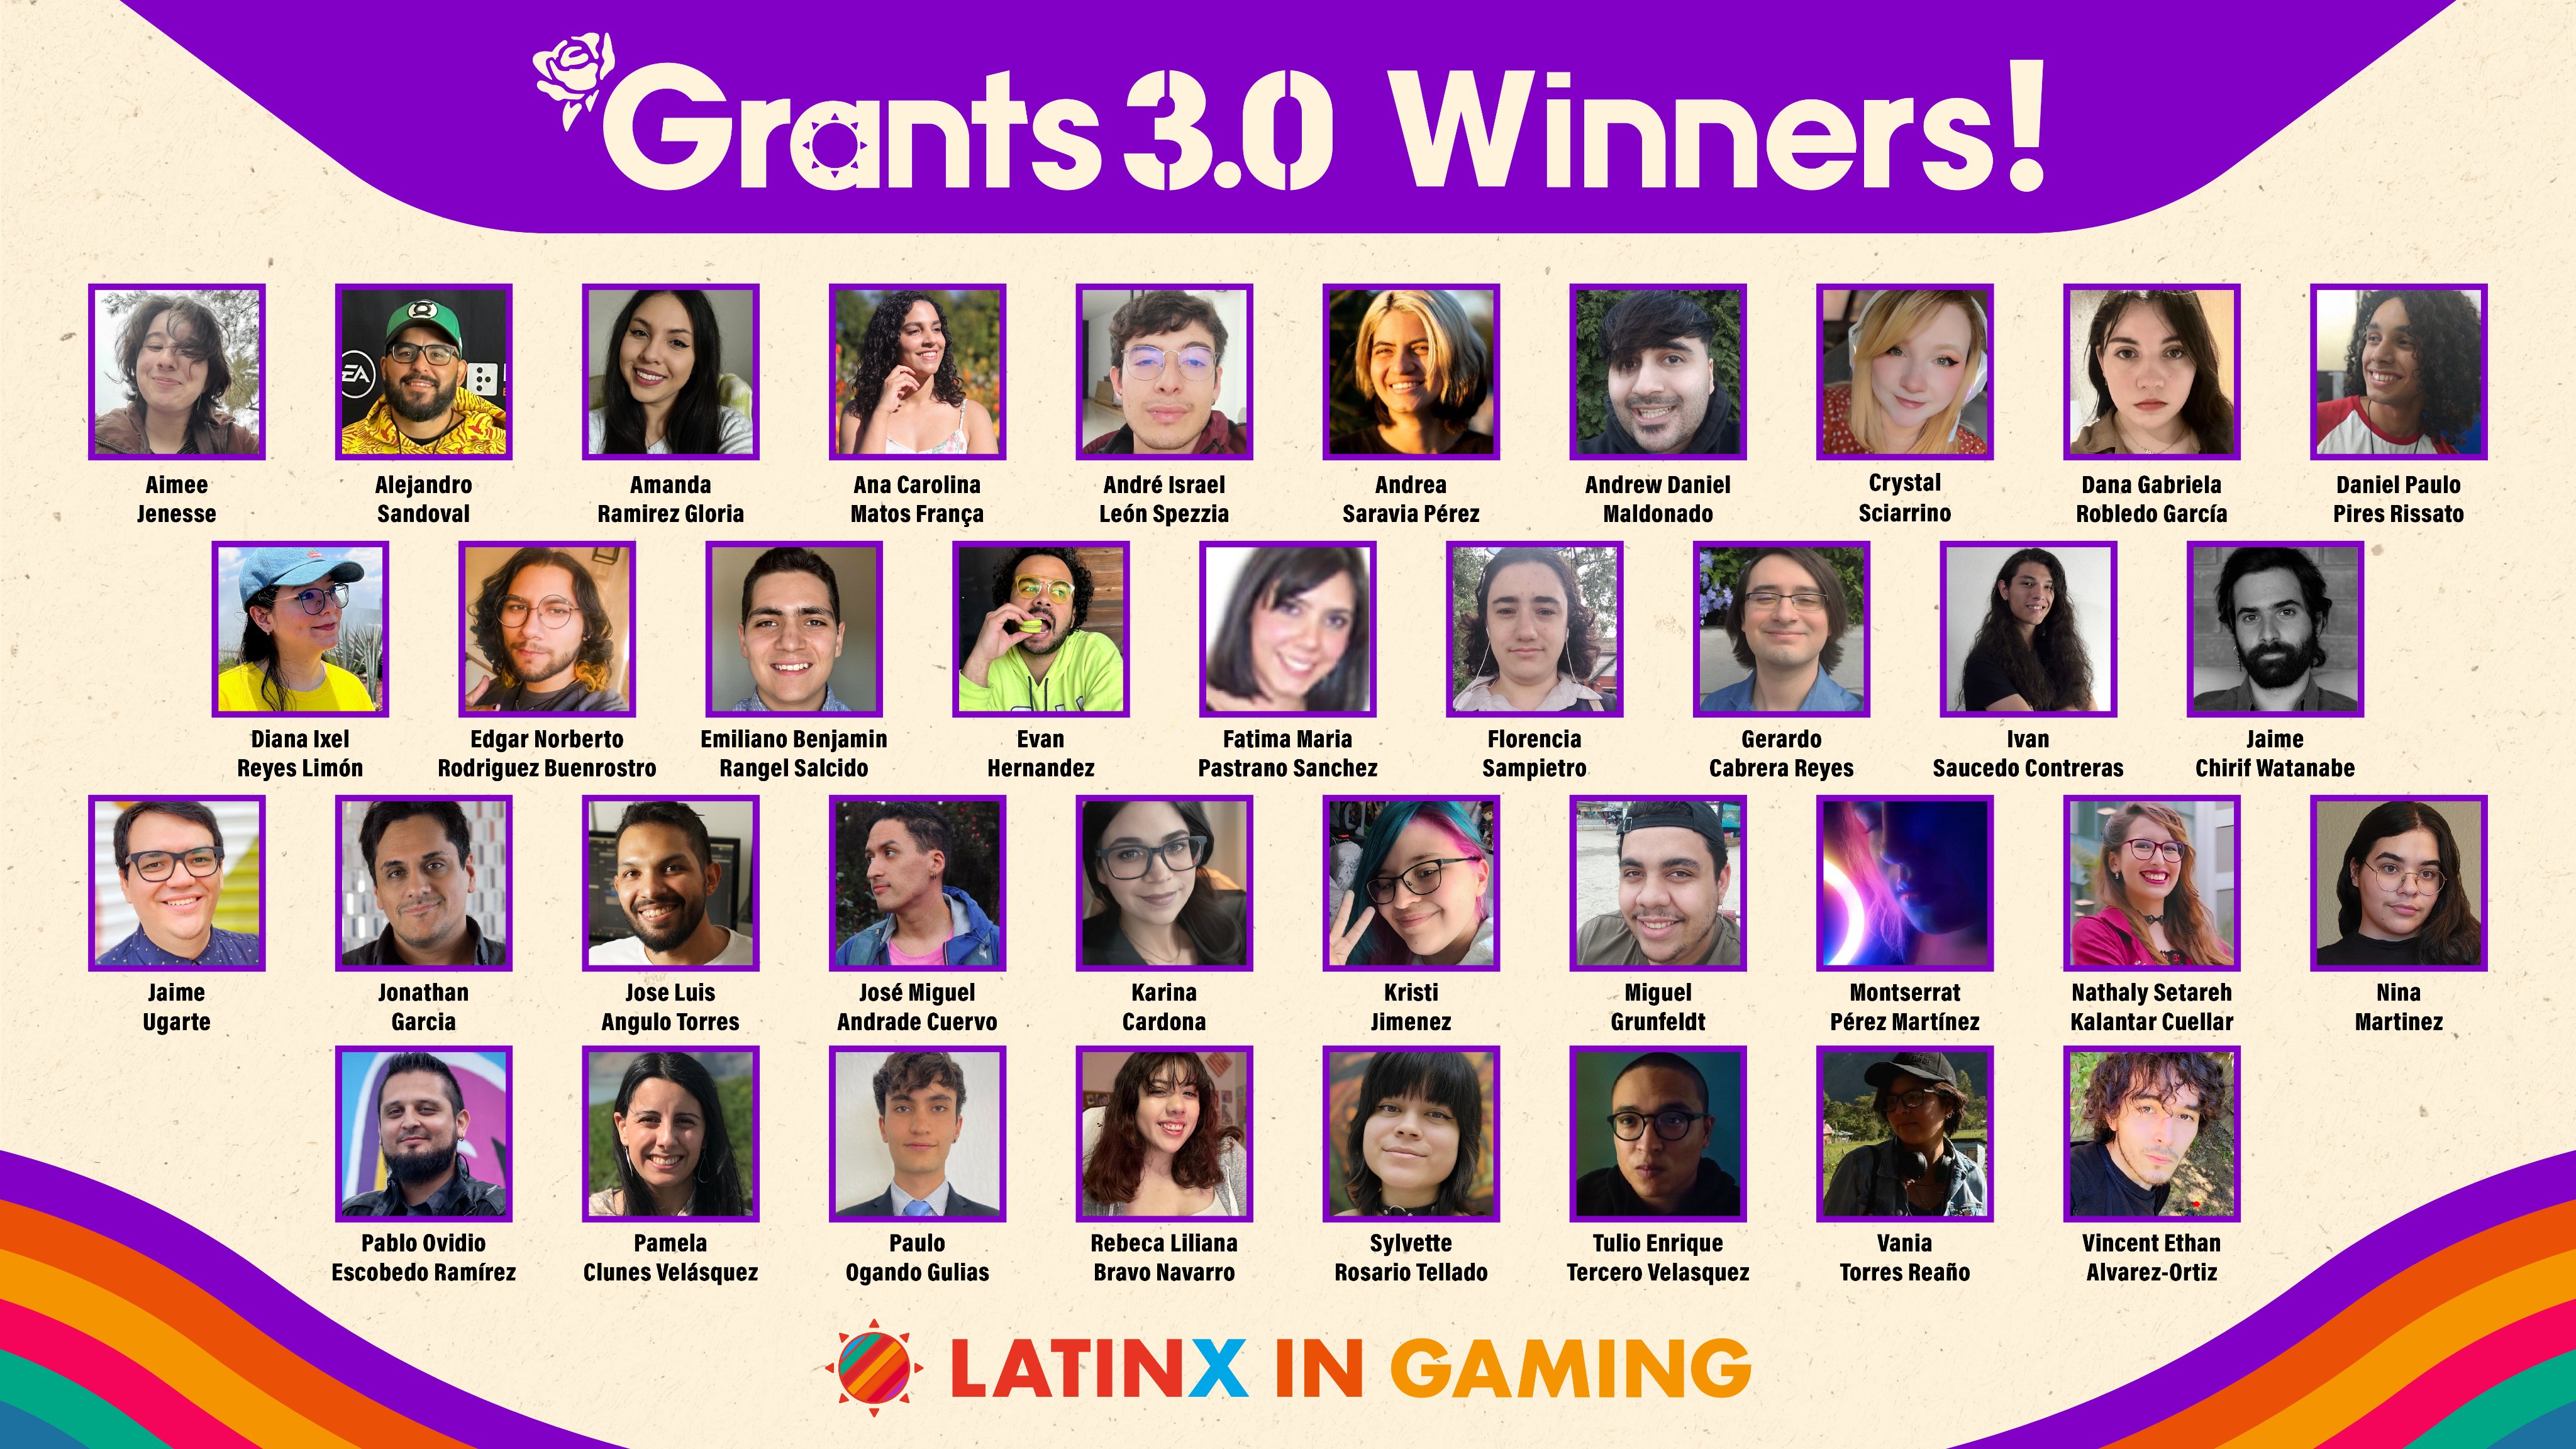 Latinx in Gaming on X: This year, we have partnered with Google